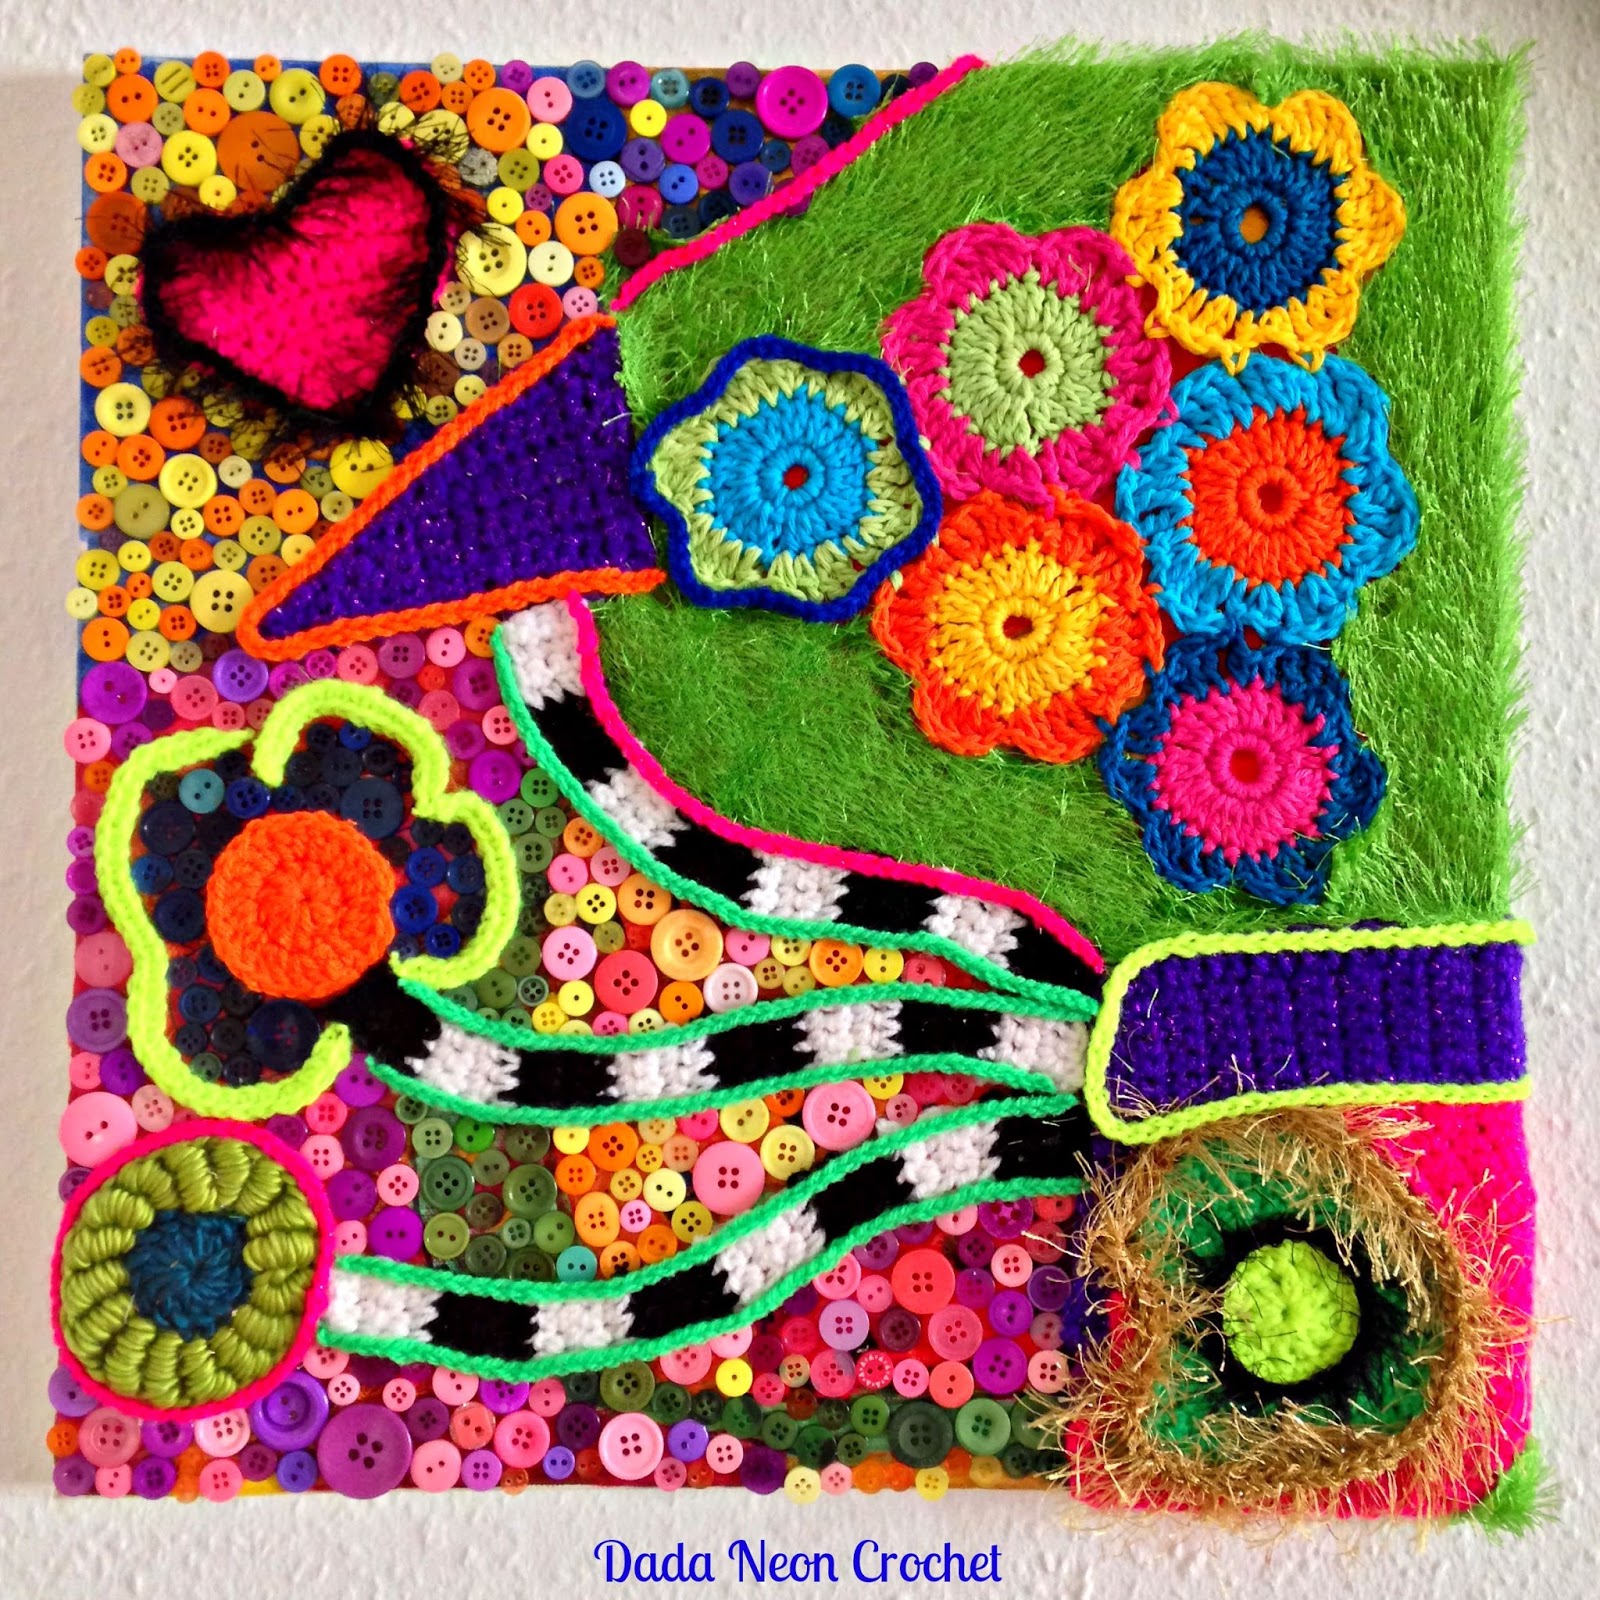 Dada Neon Crochet: A Yarnpainting - With Buttons!